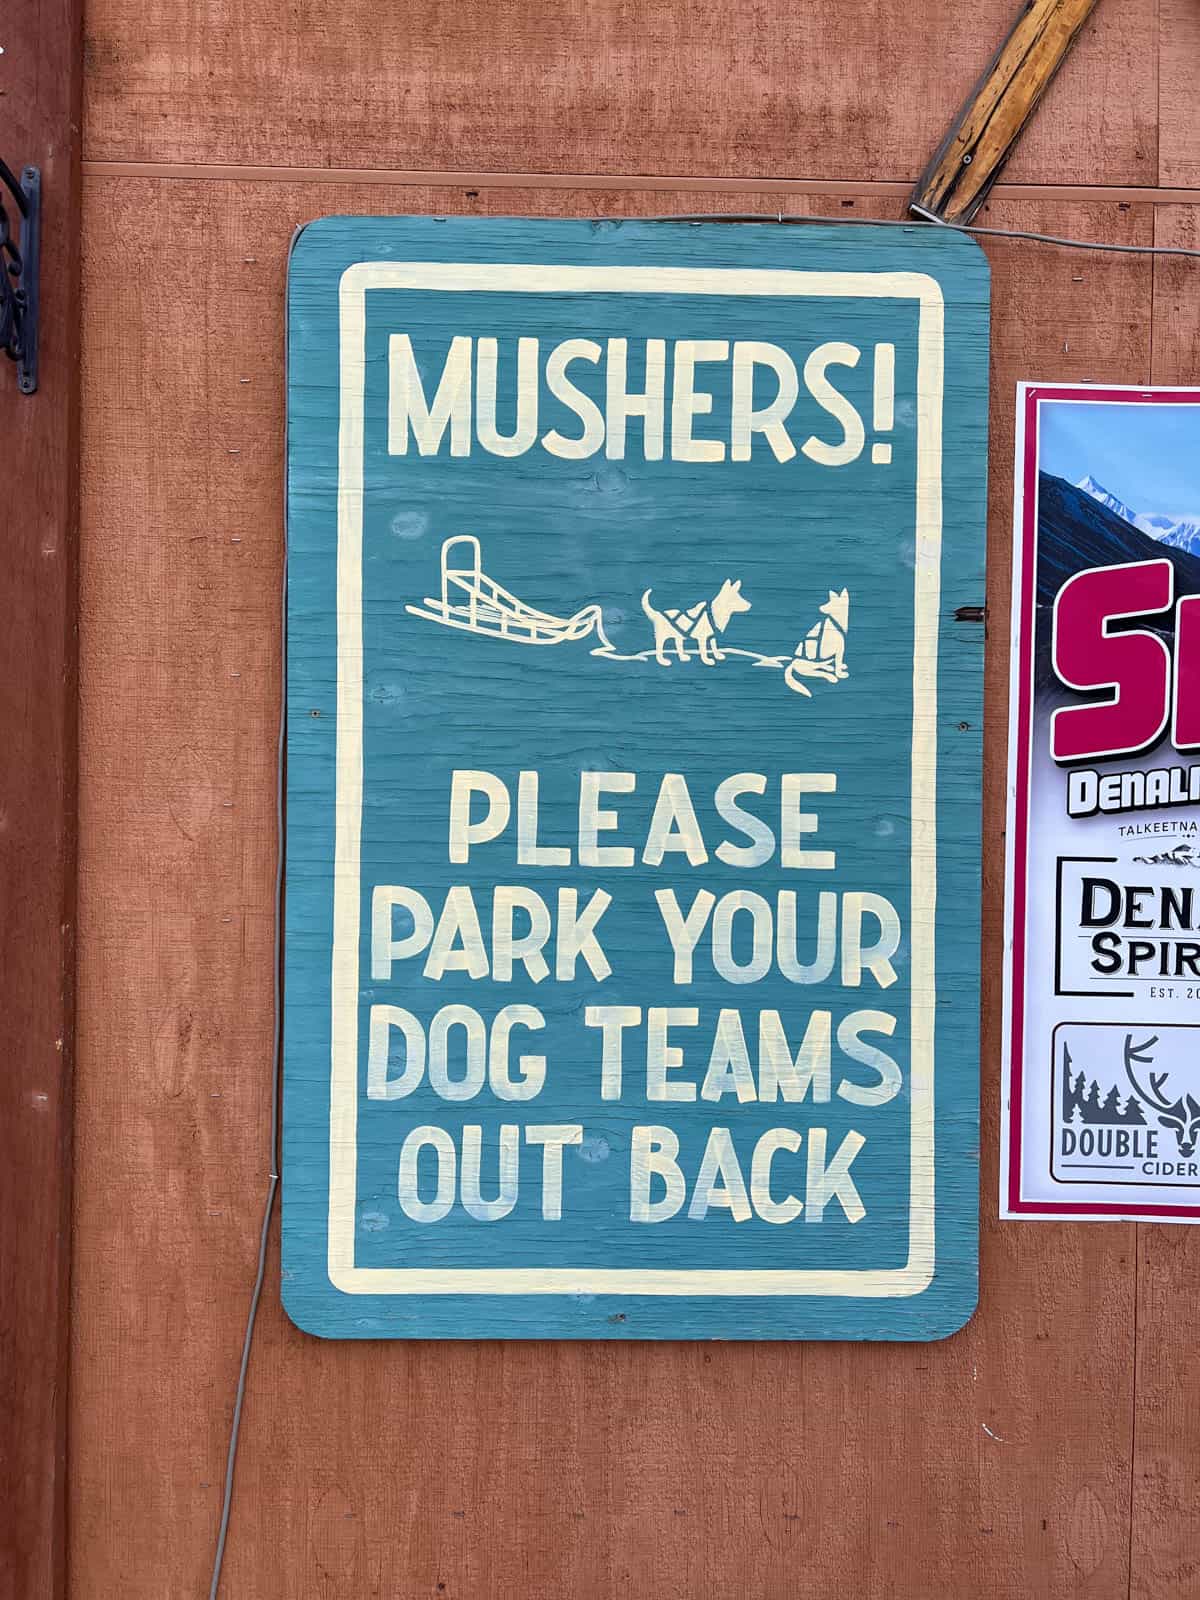 An image of a sign telling sled dog owners to park dog teams out back.